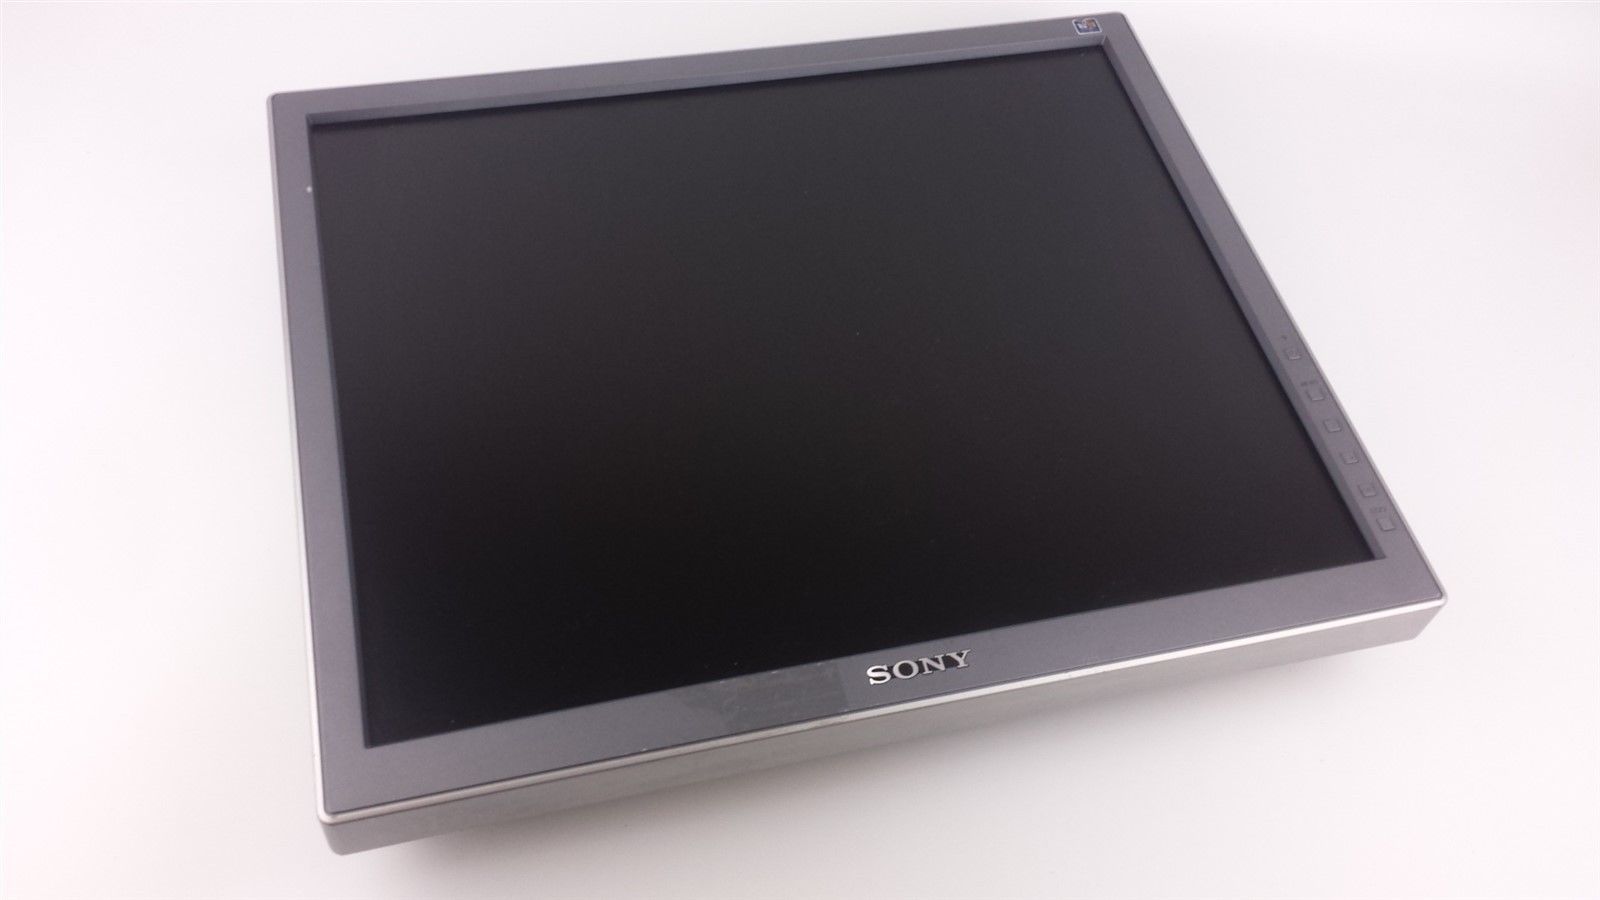 Sony SDM-S95A LCD Computer Display Monitor 19" w/ Power & VGA Cord No Stand